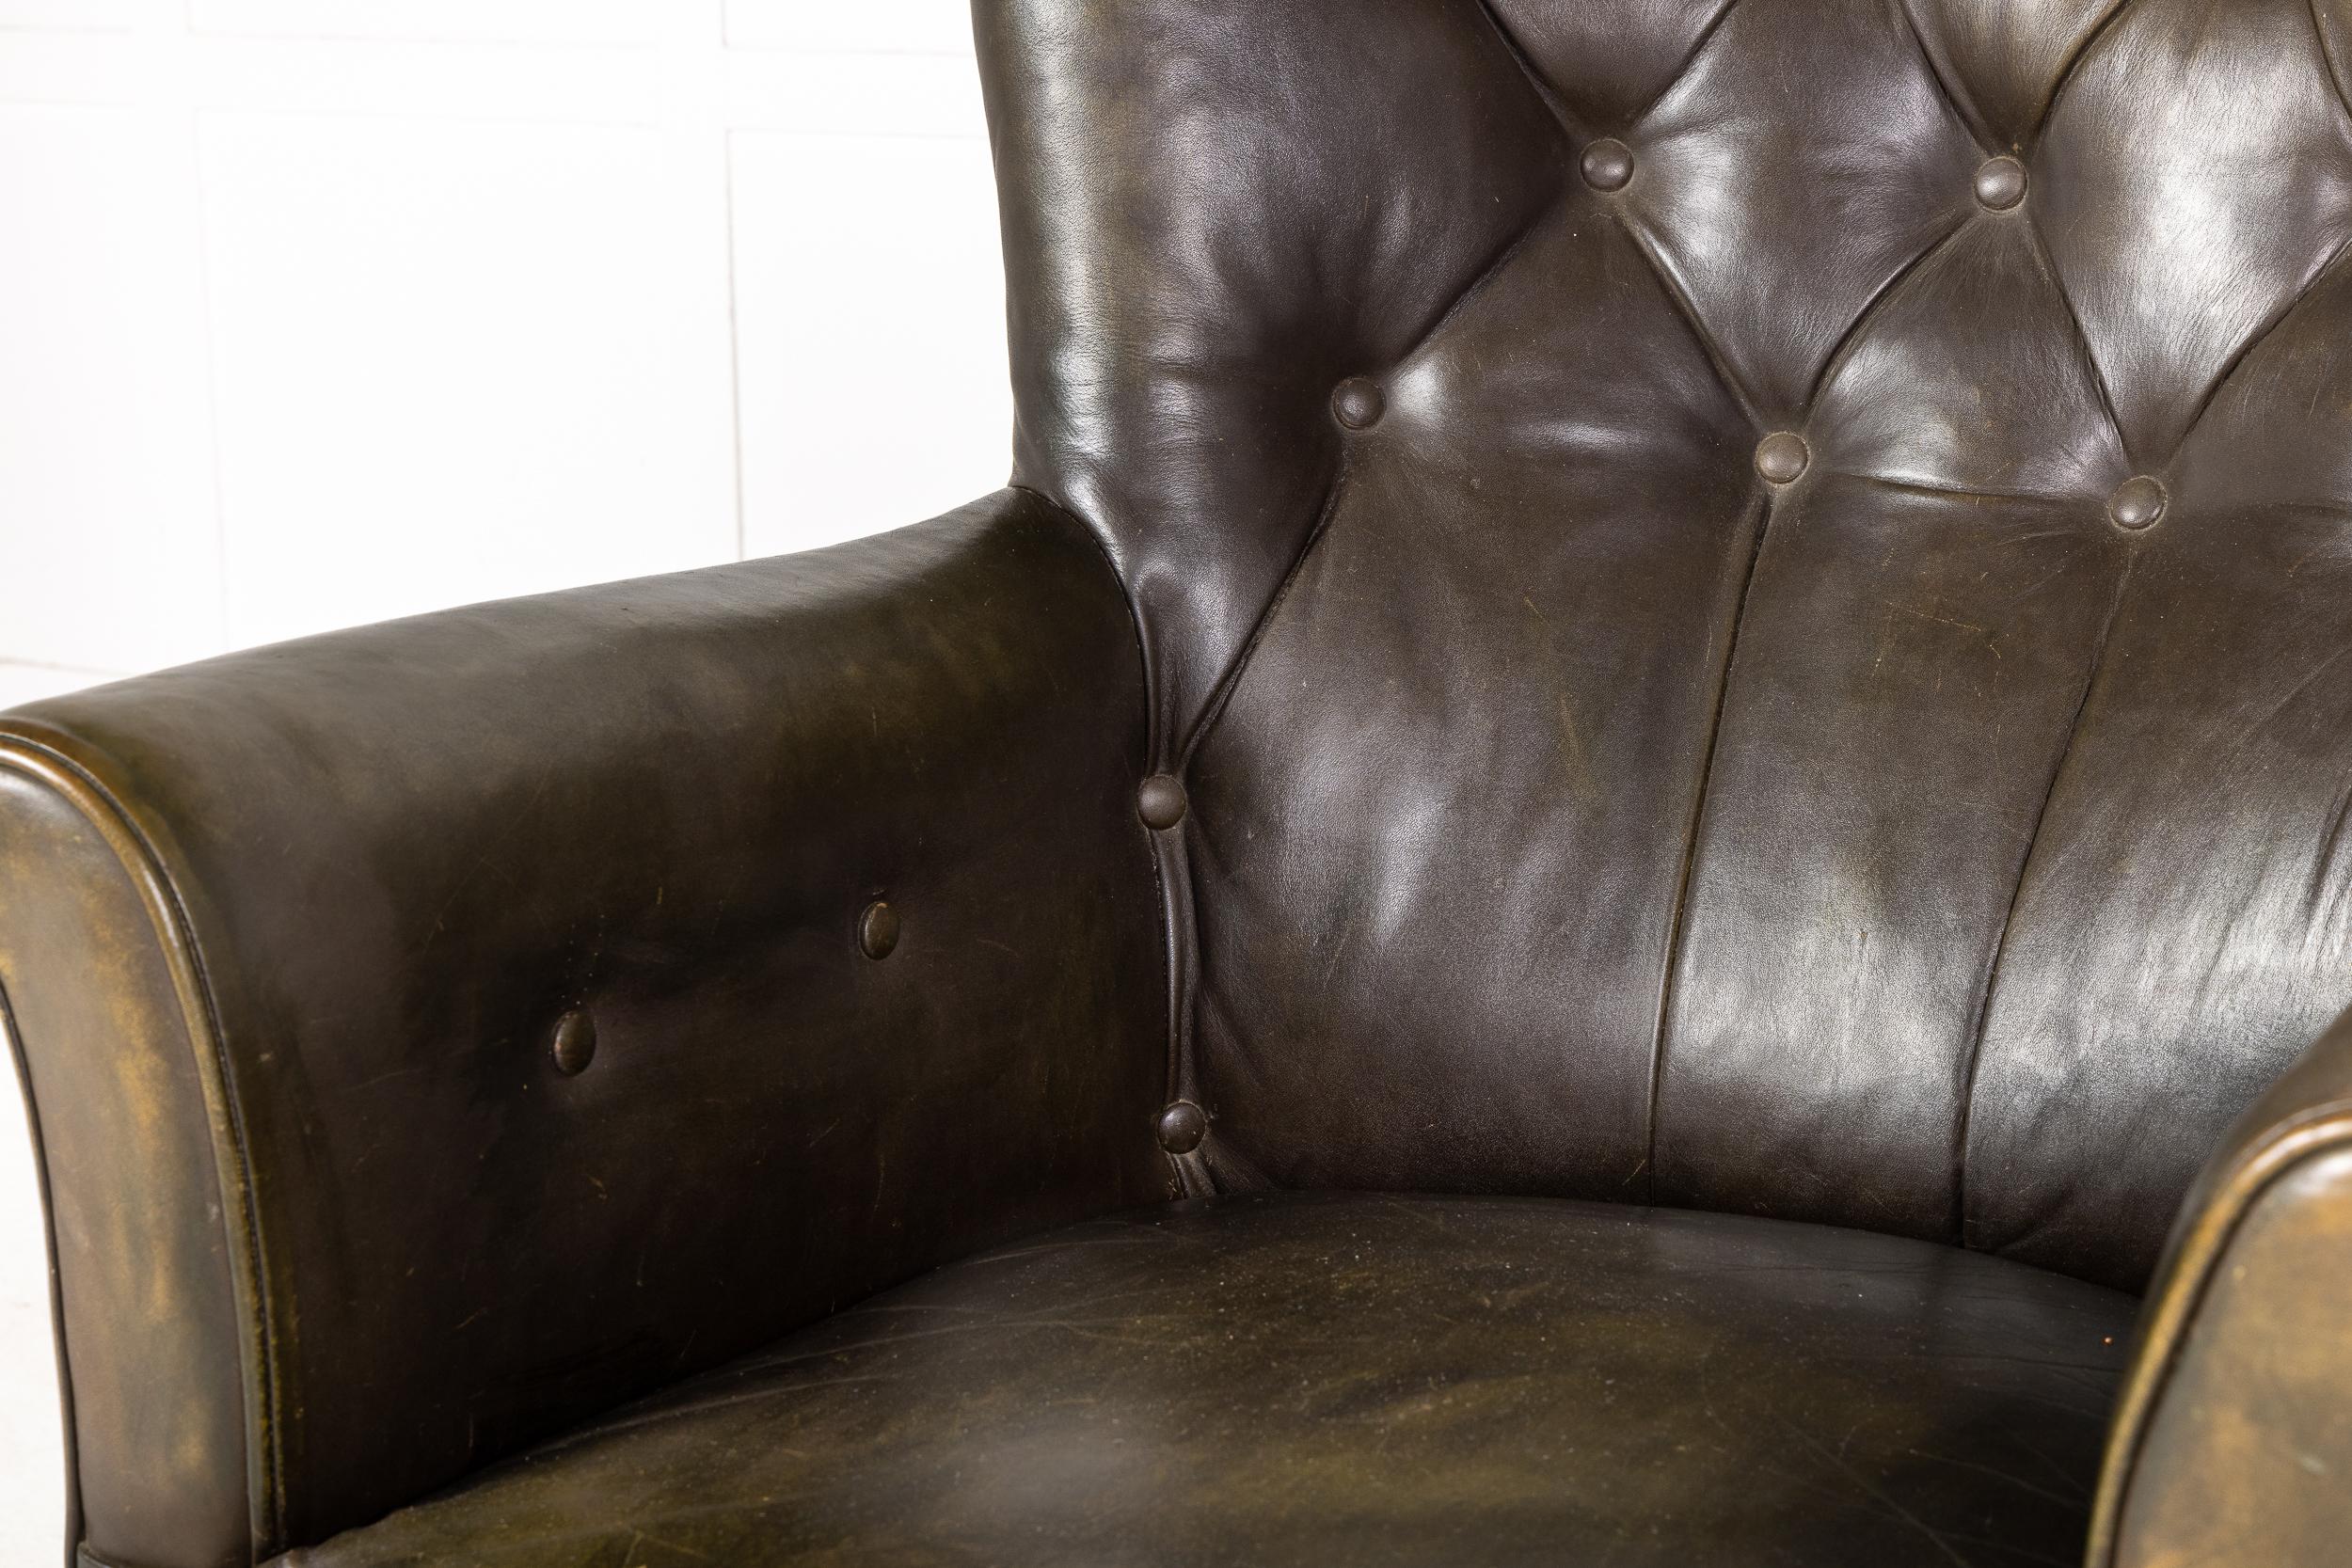 A handsome, large scale 19th century English leather armchair having a wide button back with shallow wings and deep seat. Lovely old leather upholstery and decorative brass studding on the back and side edges. Raised on turned tapered legs, capped